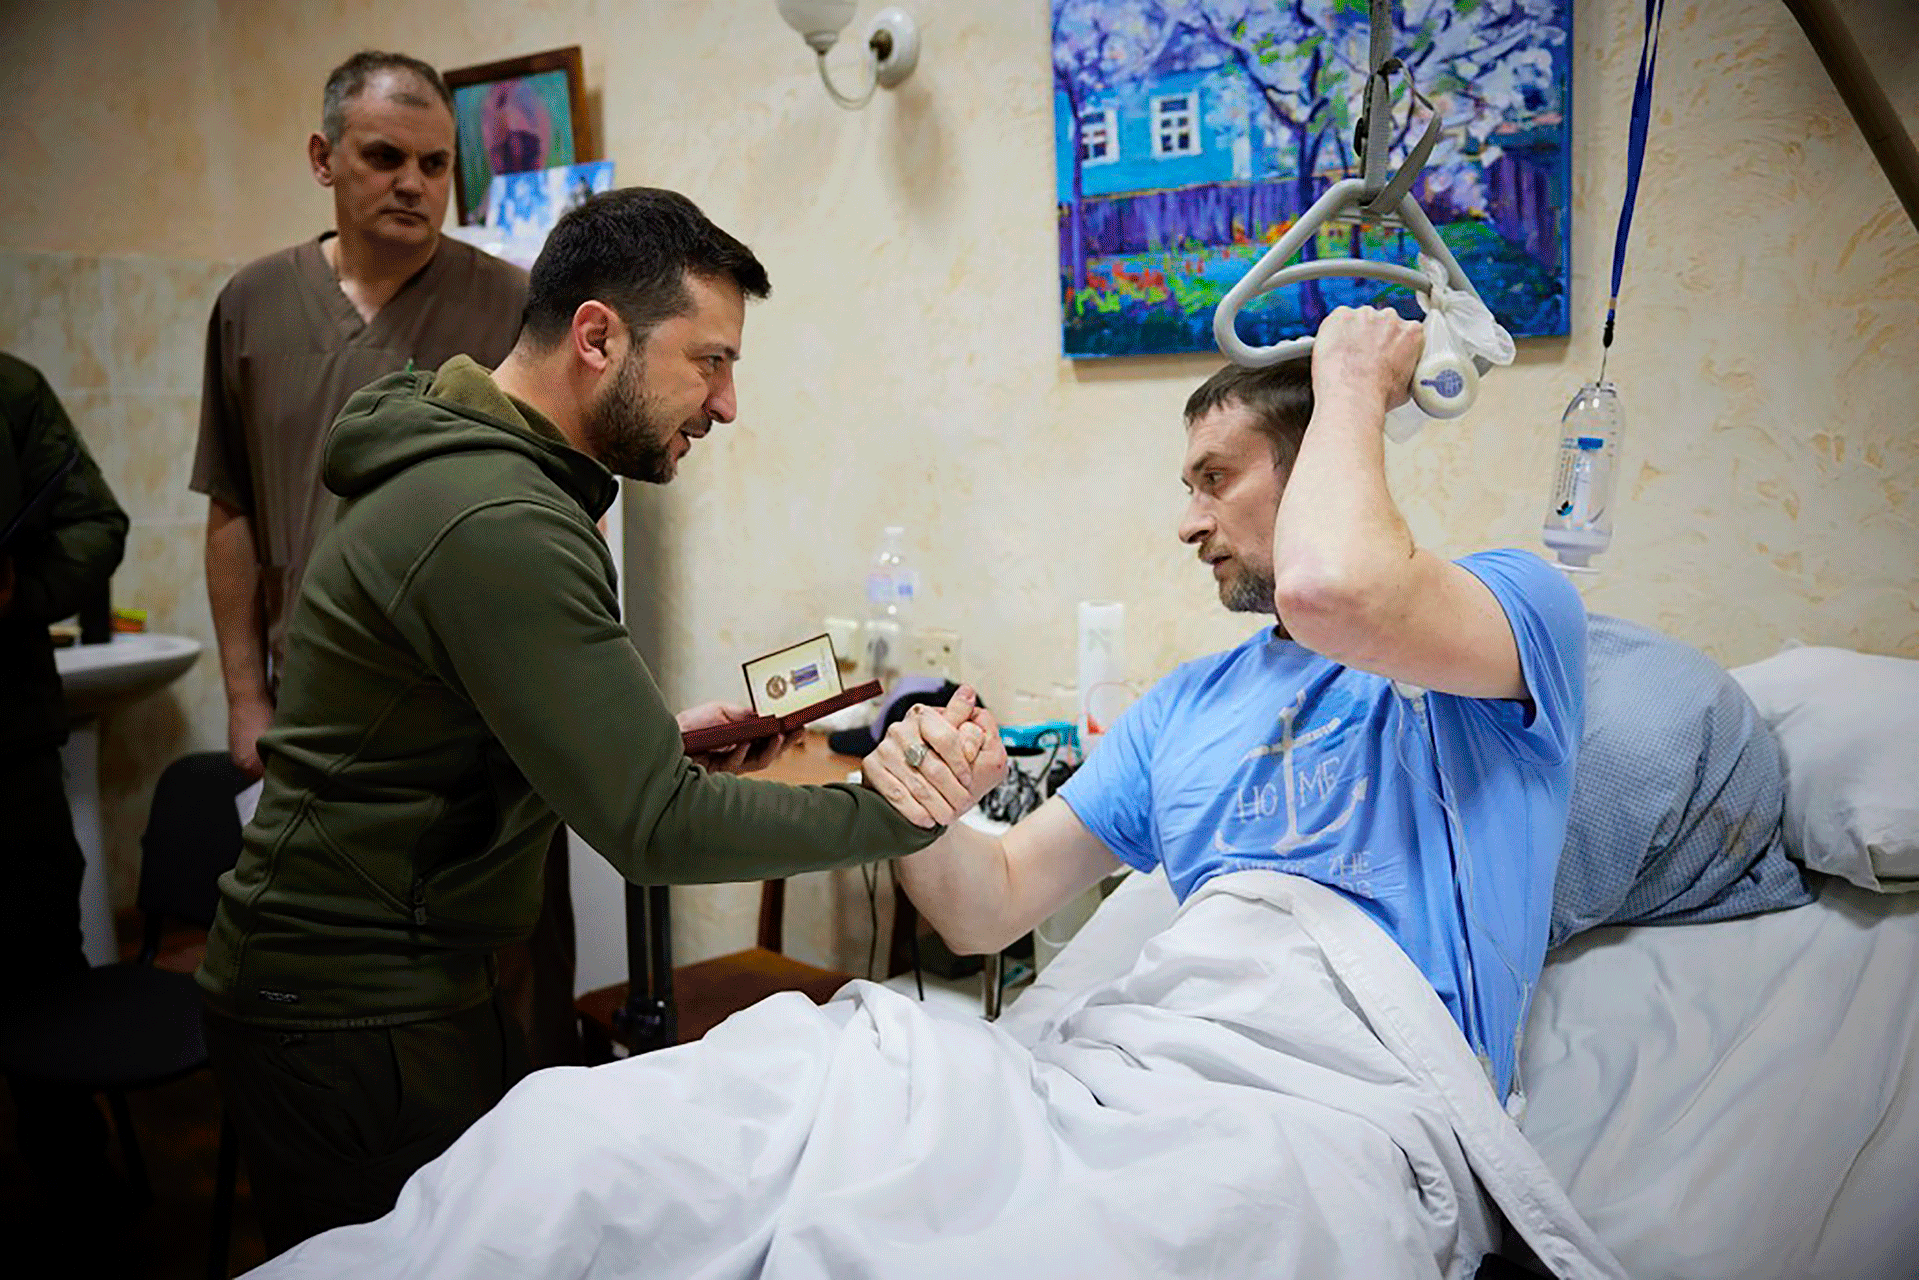 In this photo provided by the Ukrainian Presidential Press Office on Sunday, March 13, 2022, President Volodymyr Zelenskyy, center, shakes hands with a wounded soldier during his visit to a hospital in Kyiv, Ukraine.